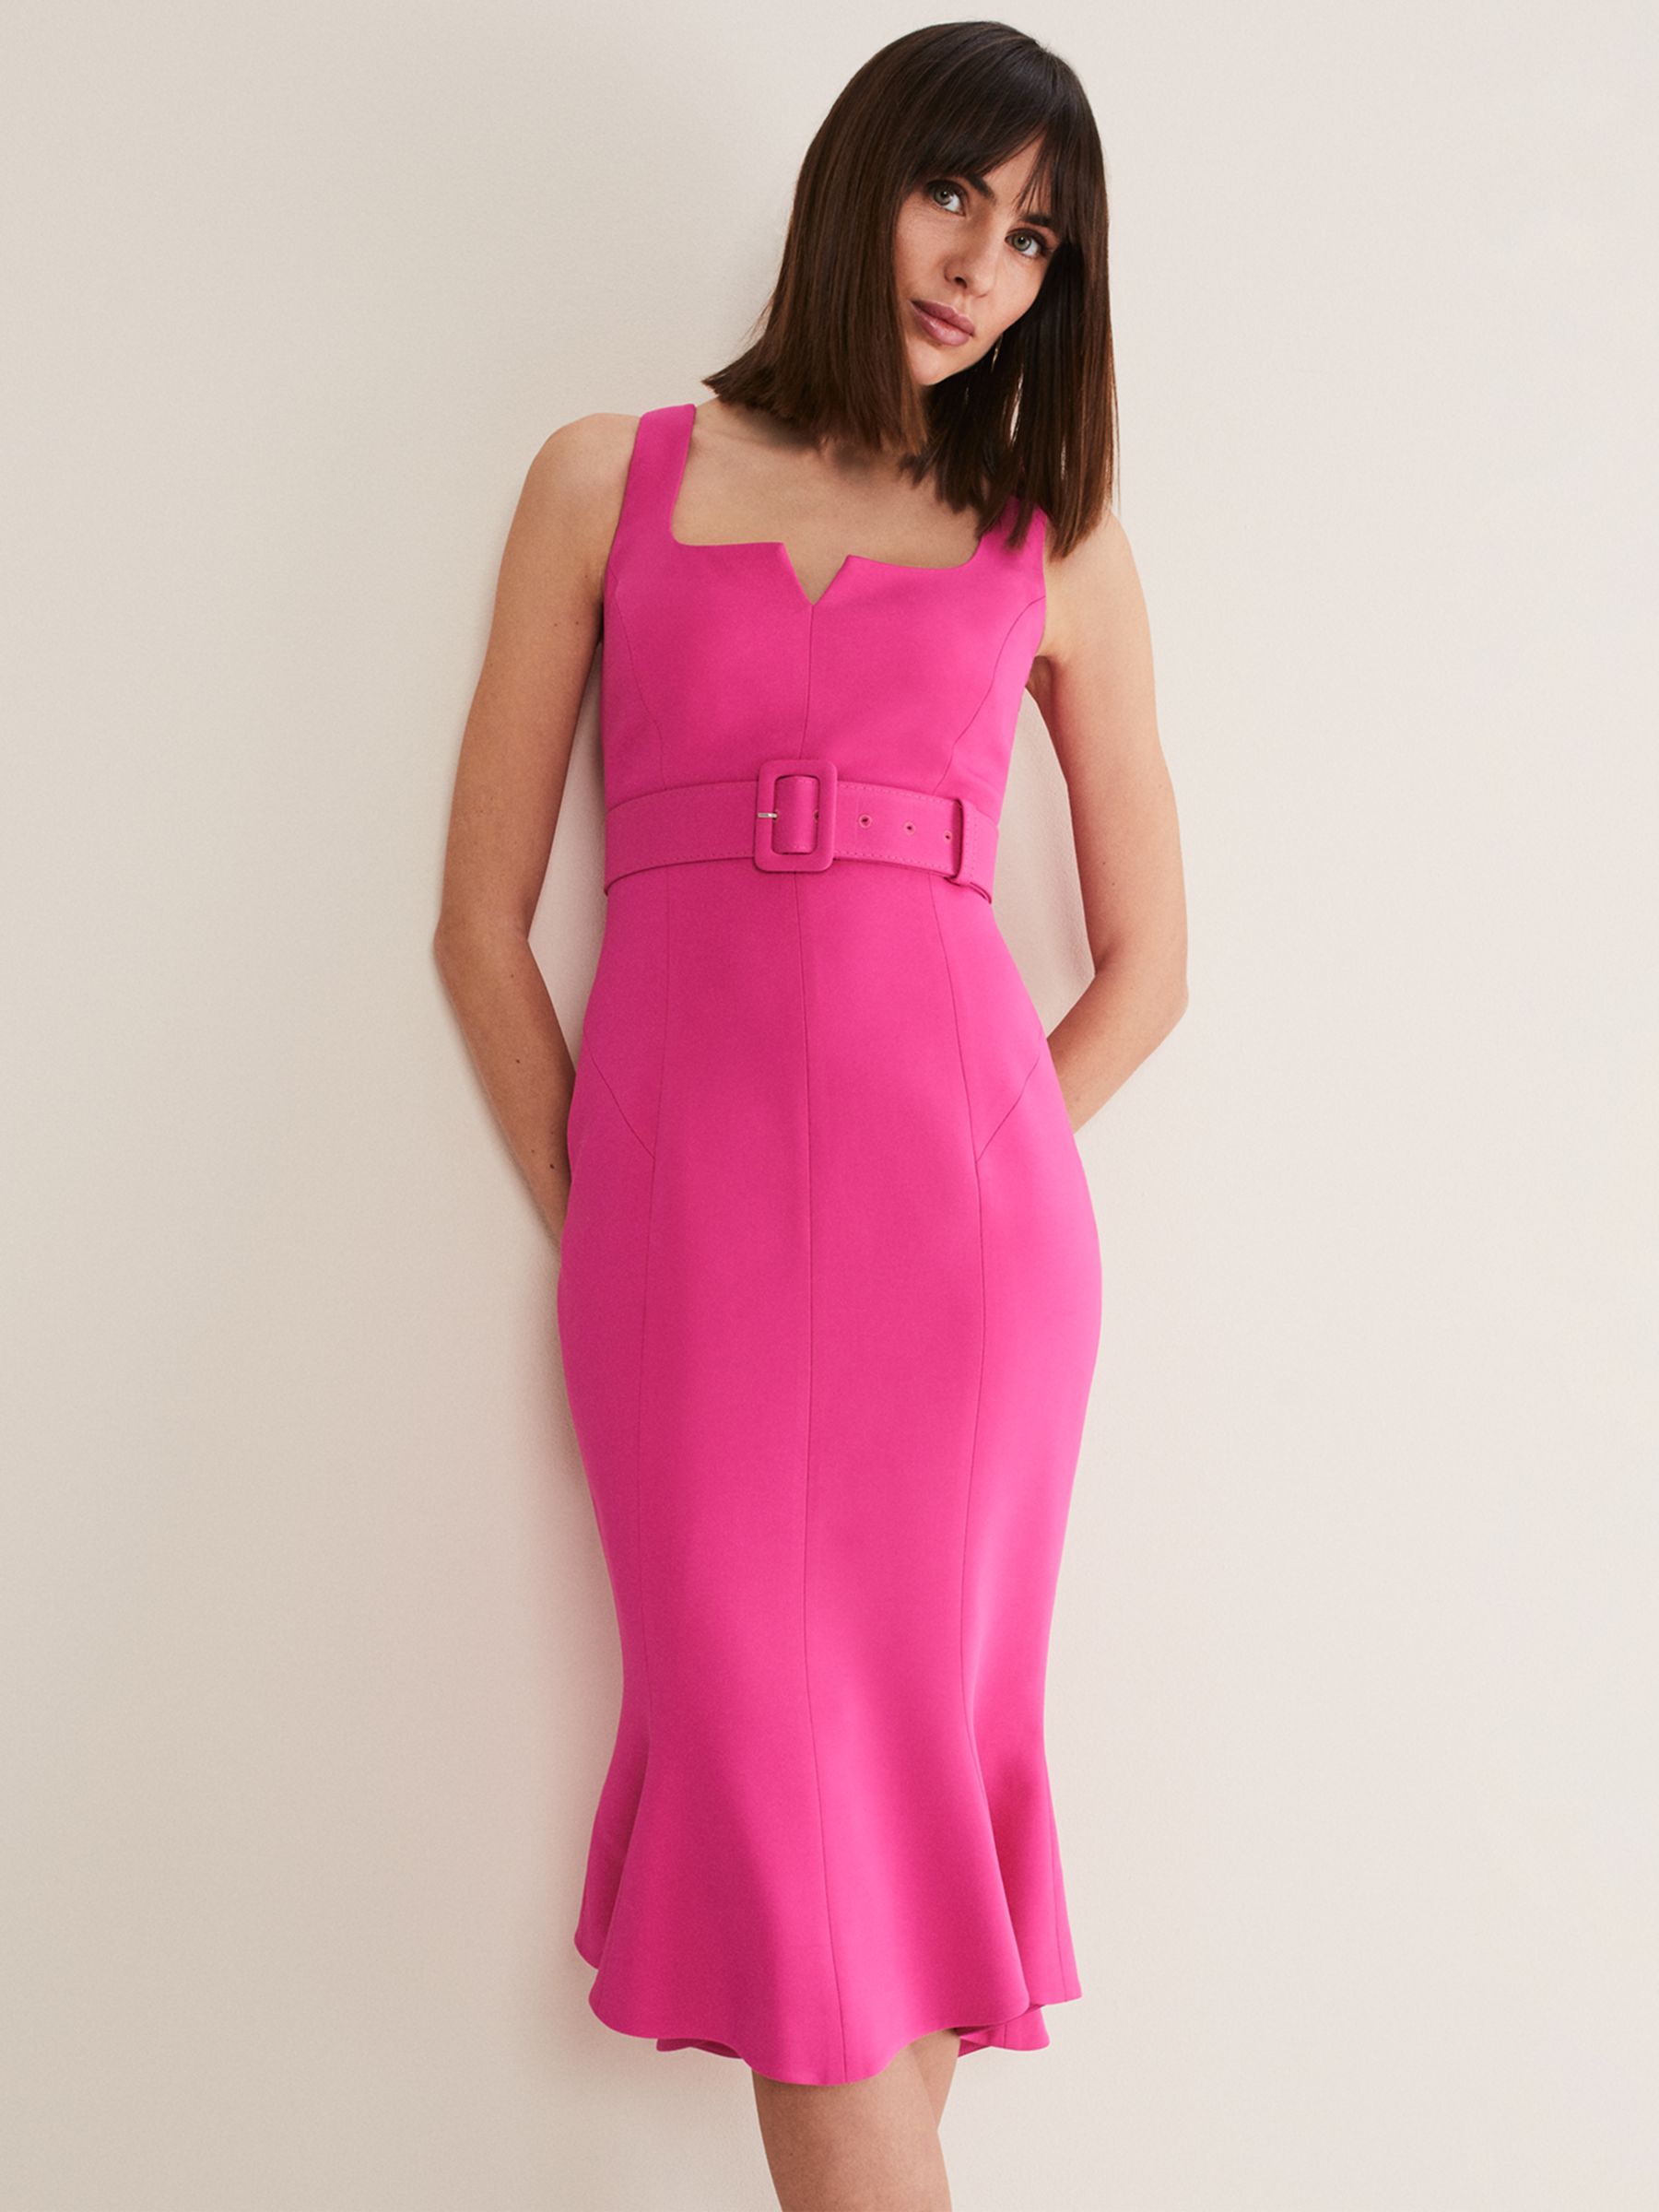 Phase Eight Adria Tailored Belted Trousers, Hot Pink at John Lewis